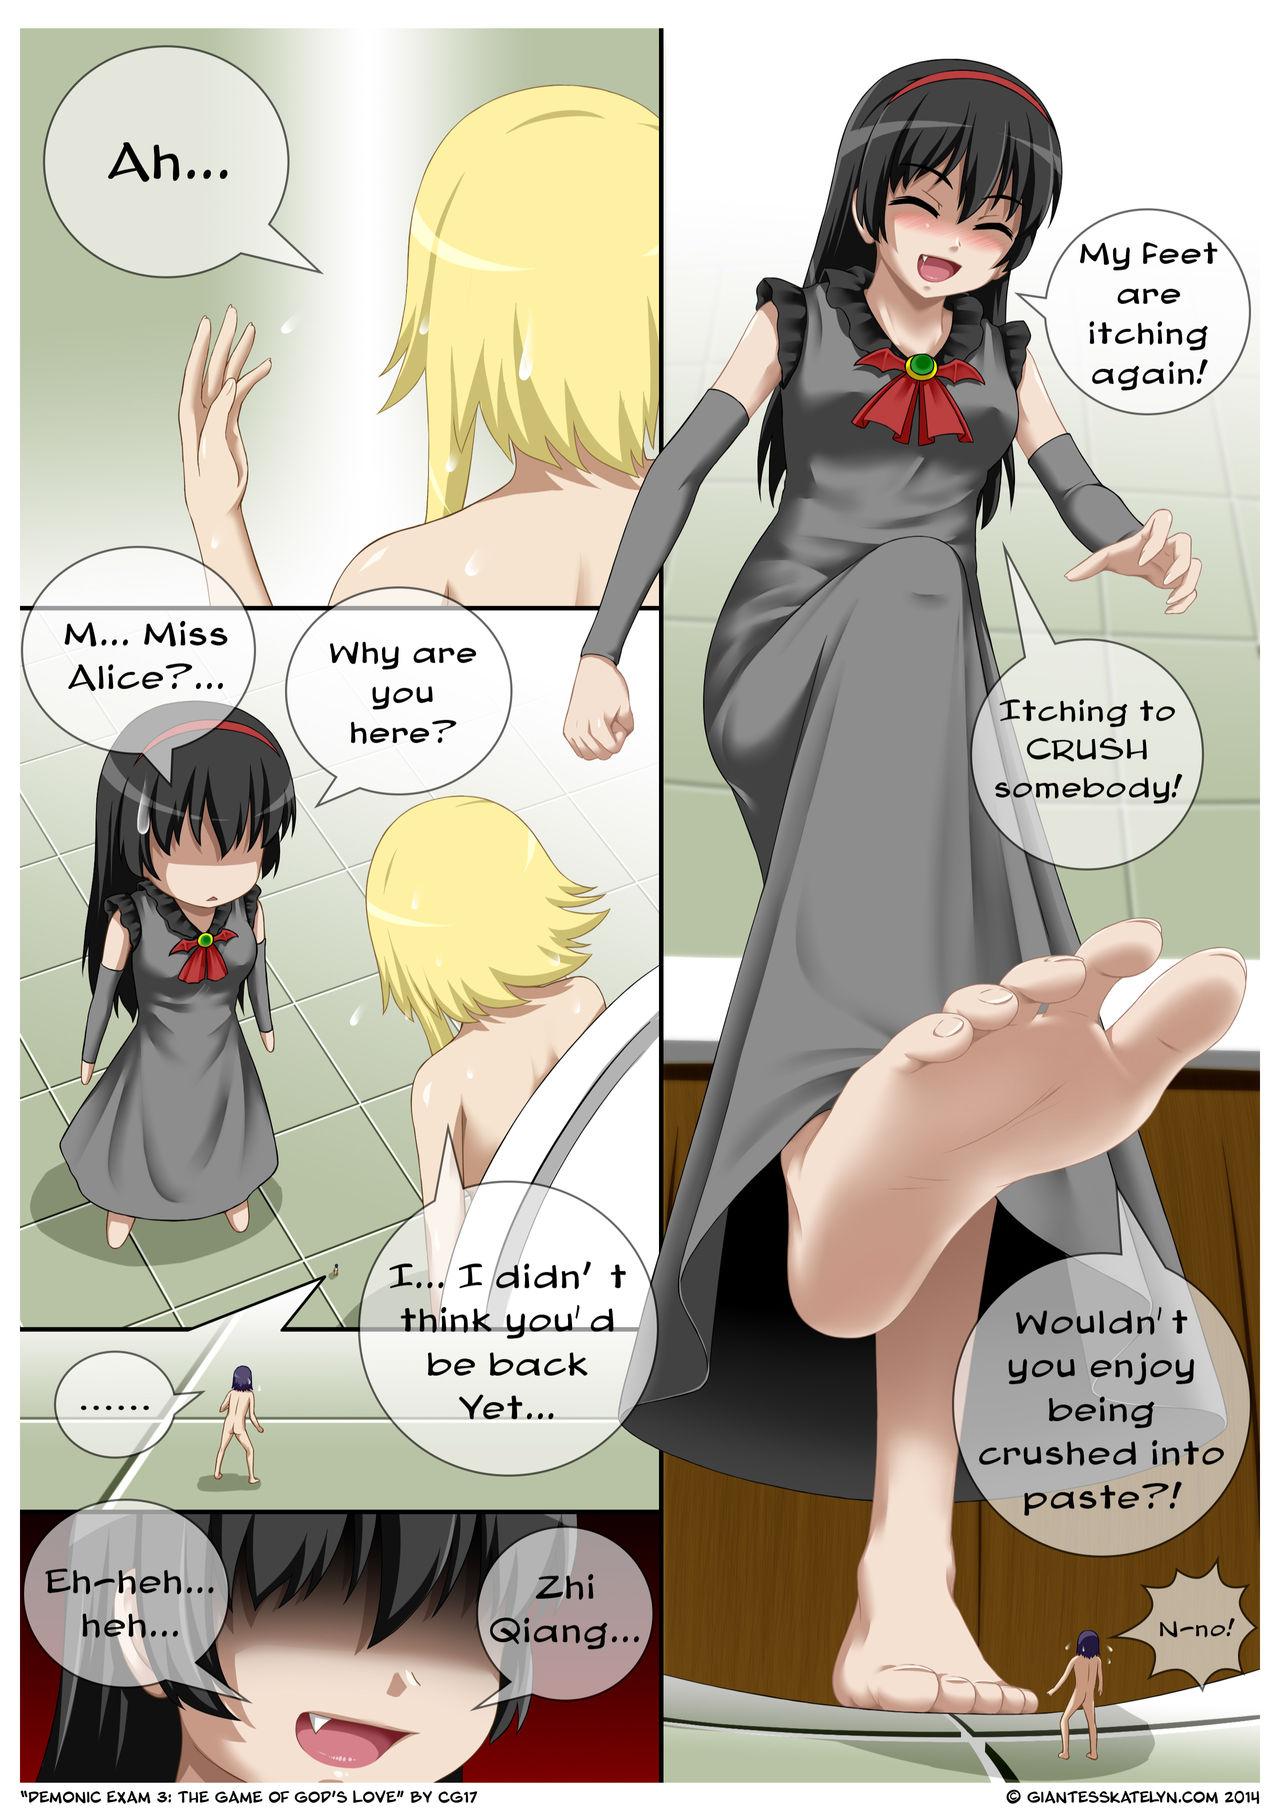 T Girl Demonic Exam 3: The Game of God's Love Stepfather - Page 6